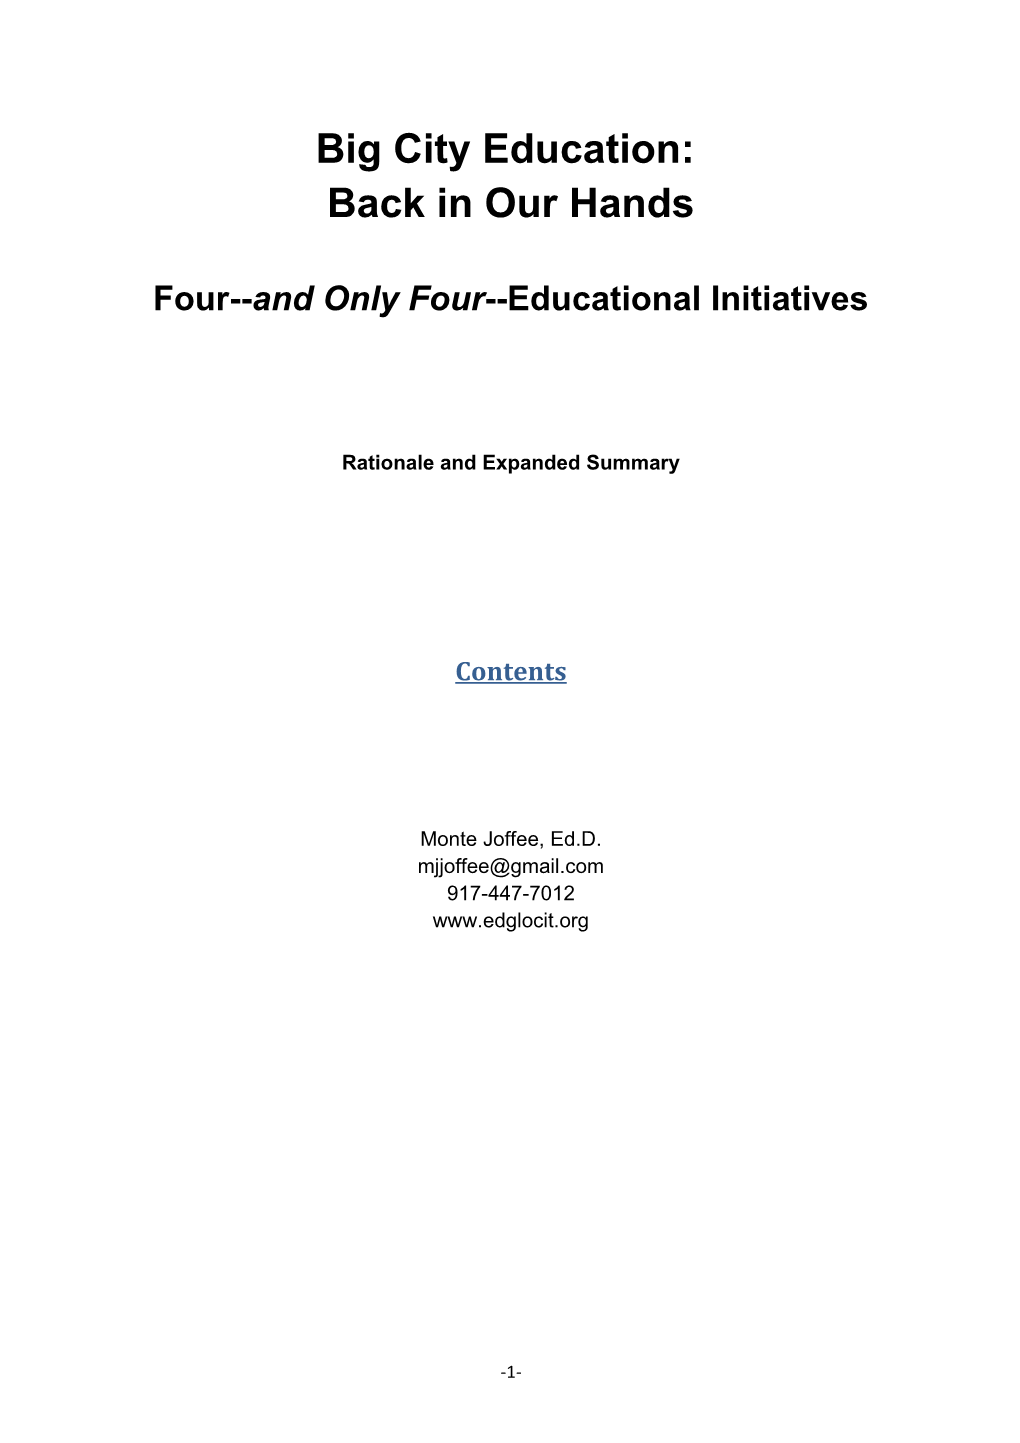 Four and Only Four Educational Initiatives